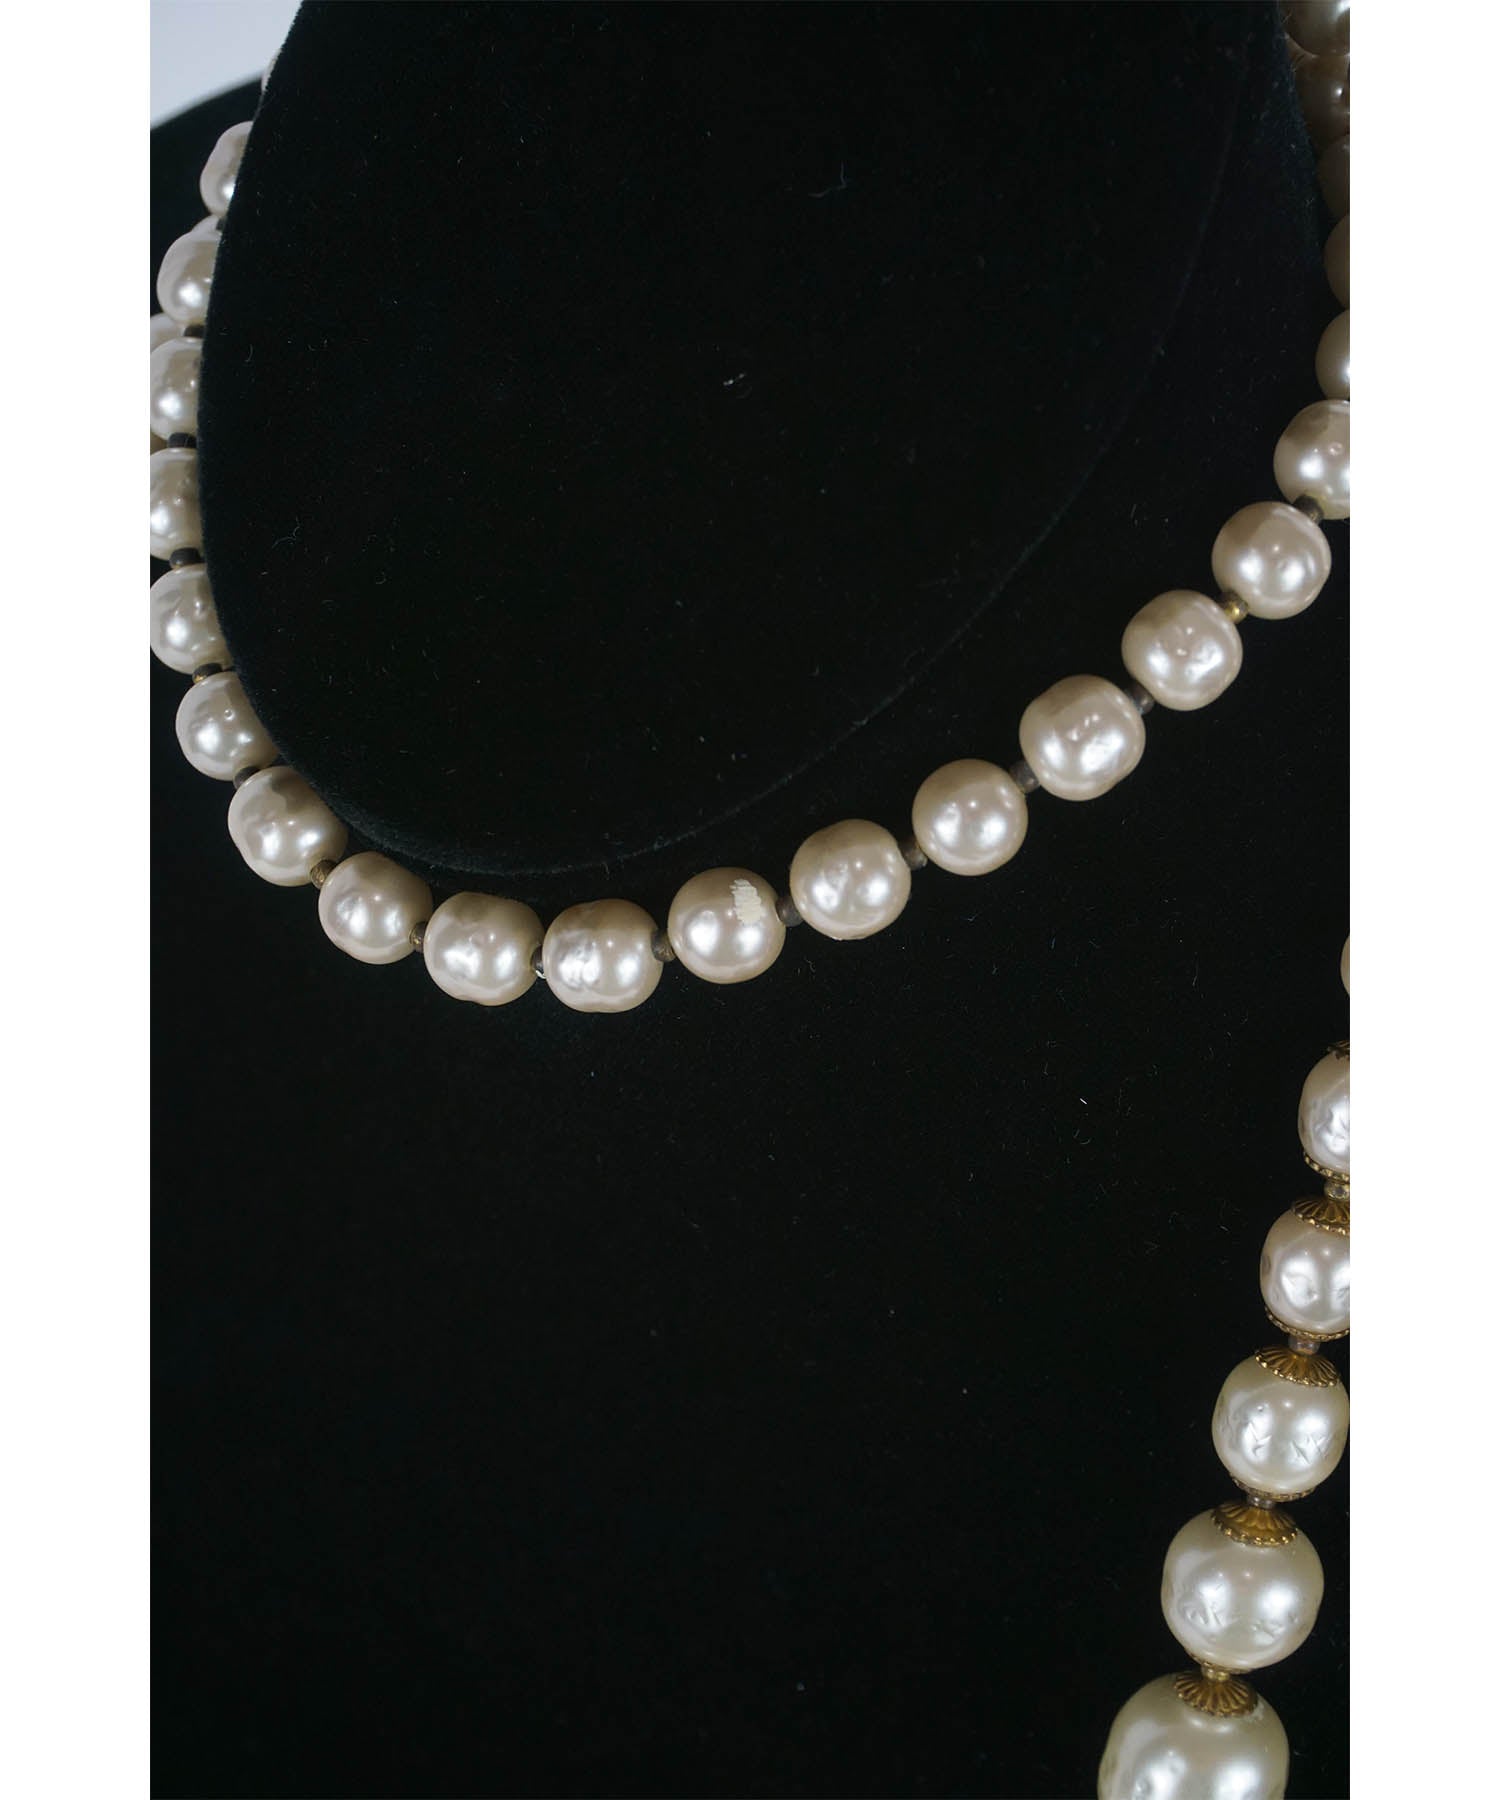 Vintage 1940s Pearl & Crystal Lariat Necklace